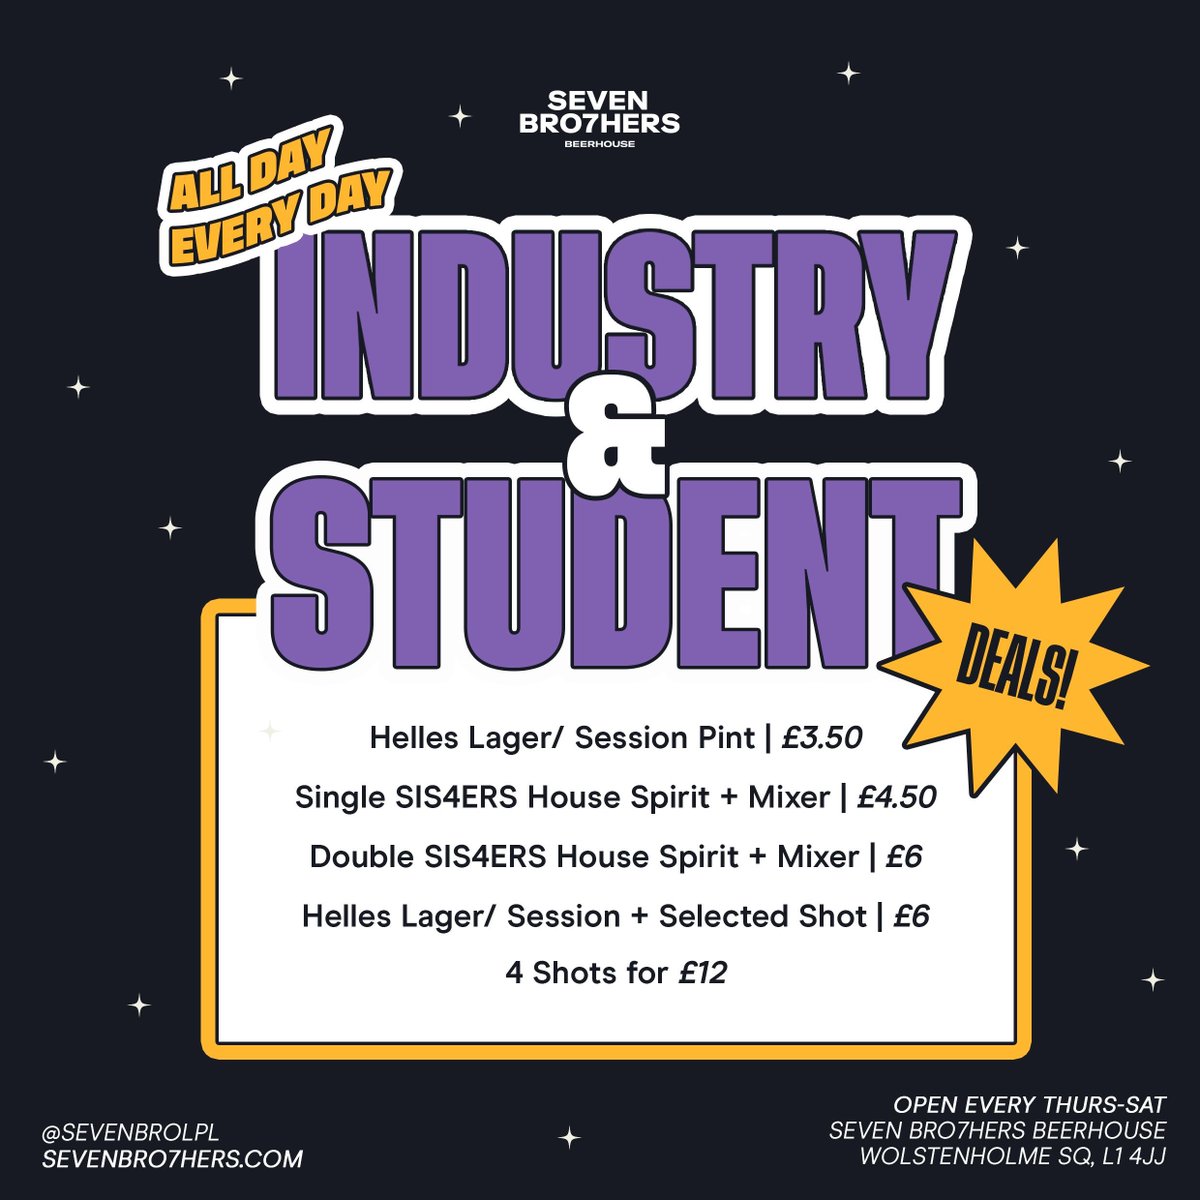 📣 CALLING ALL HOSPITALITY WORKERS & STUDENTS! 📣 Enjoy your favourite drinks for less with our special deals every day at our Liverpool Beerhouse! We're open Thurday-Saturday - pop down to say hello 👋